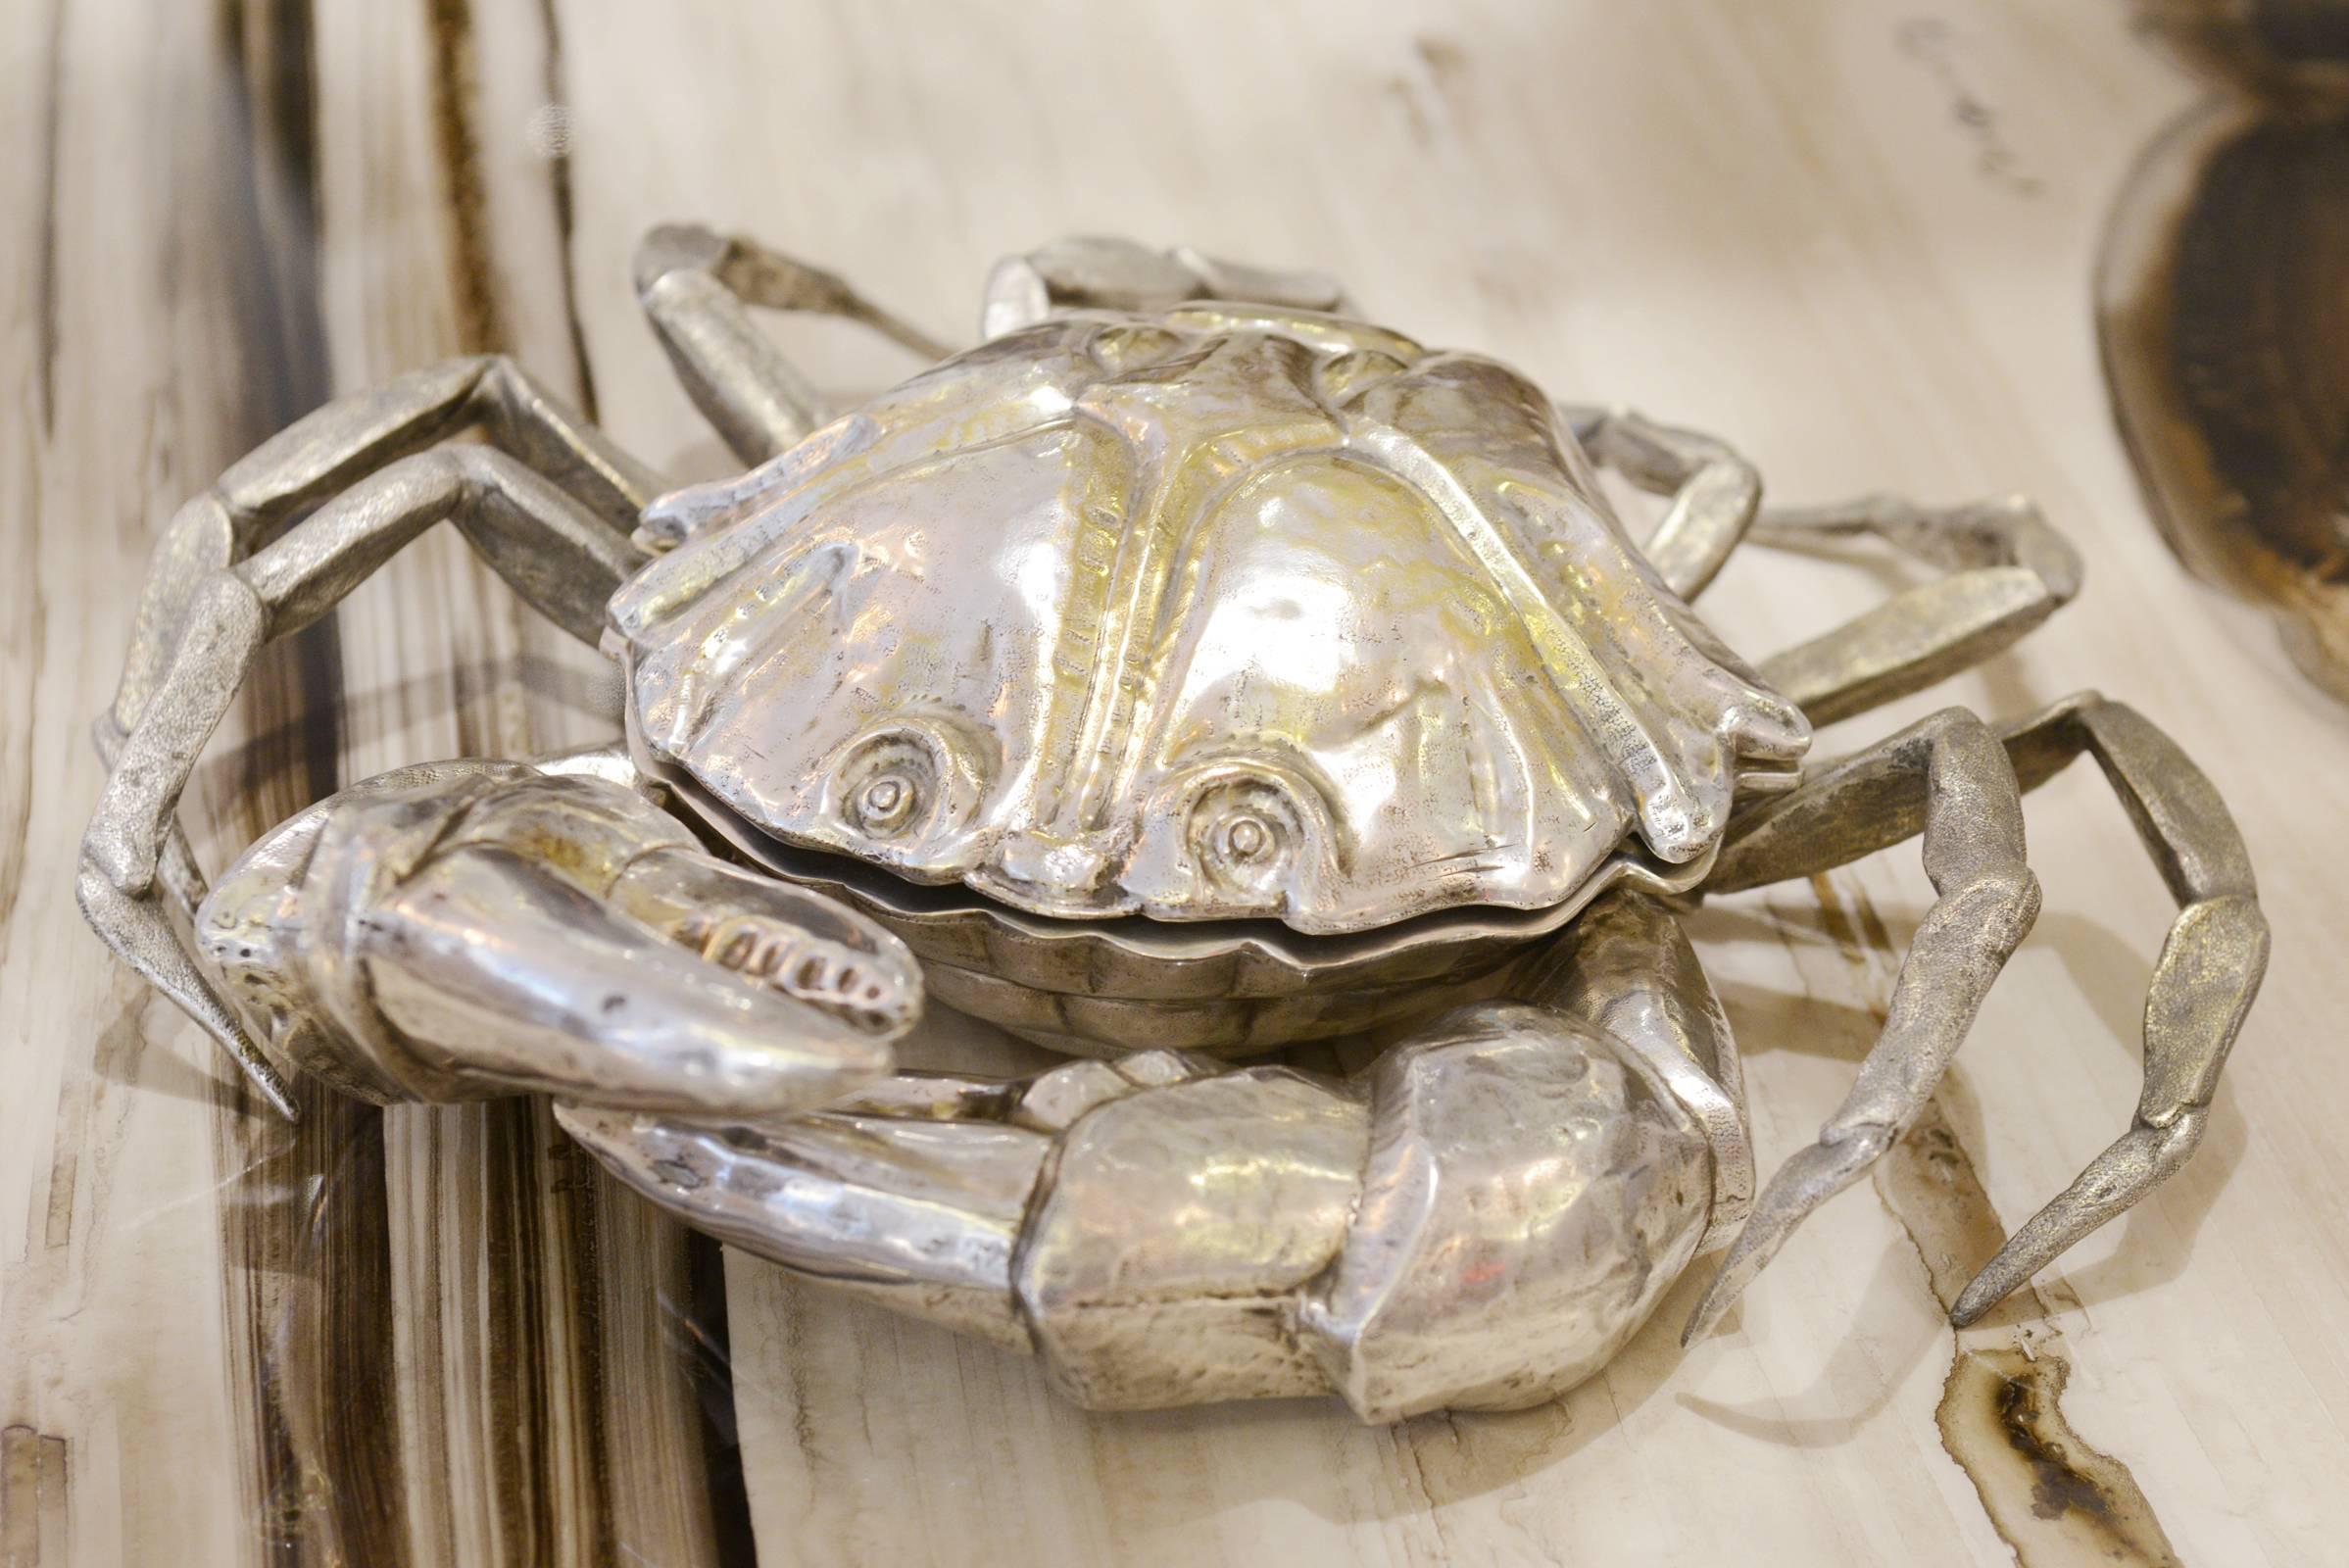 Caviar cup crab made in chiselled silver bronze.
With clear glass cup inside. Casted piece with
handcrafted finishes. Exceptional piece.
